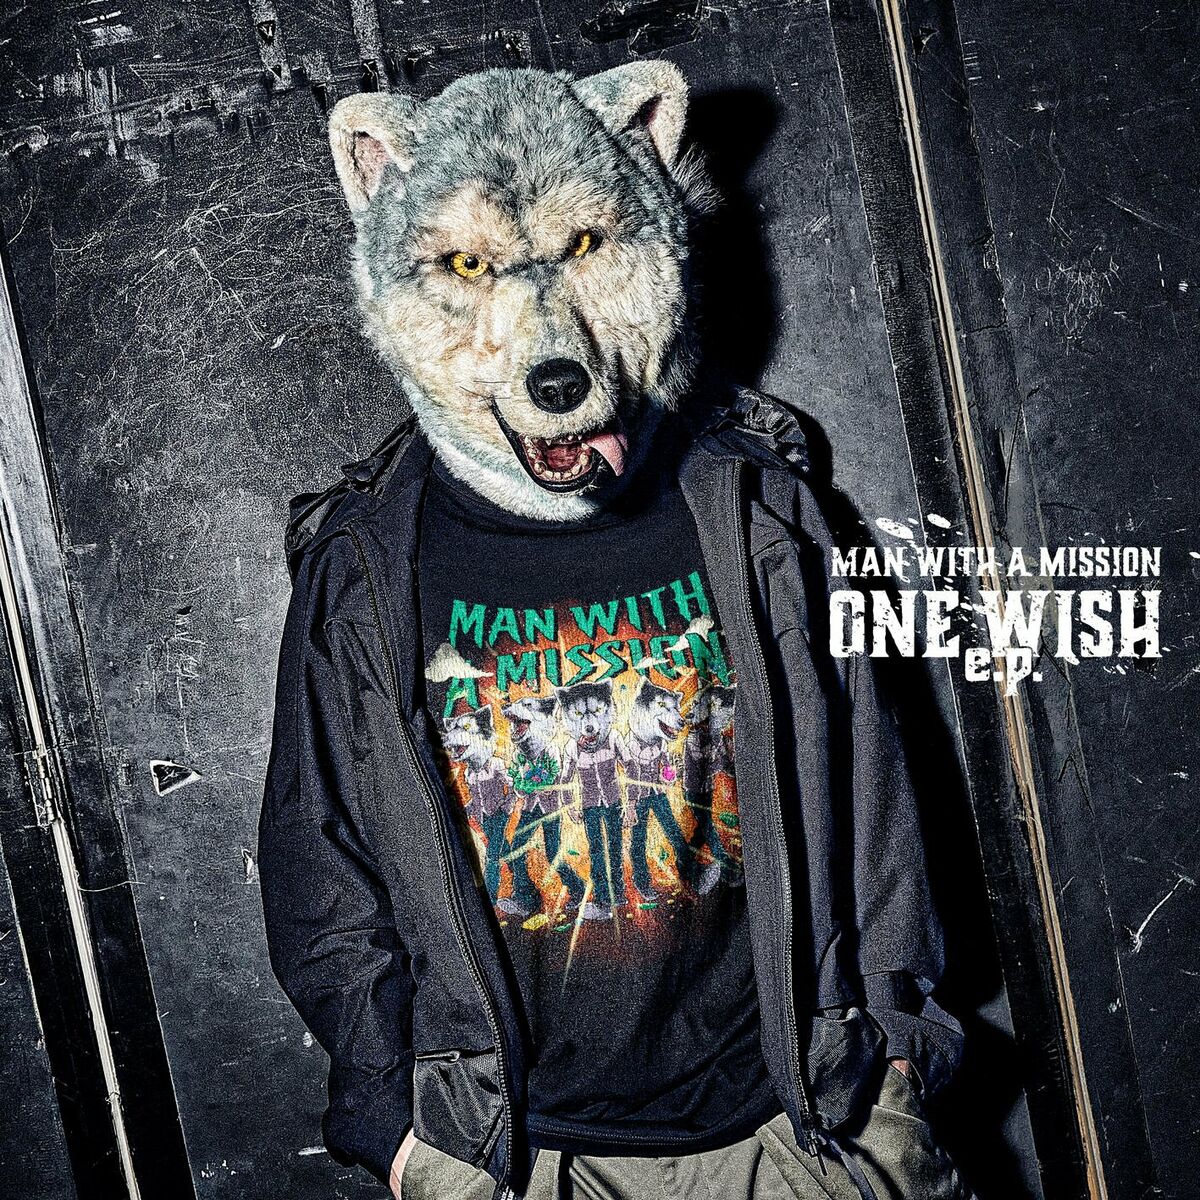 Man With A Mission: albums, songs, playlists | Listen on Deezer